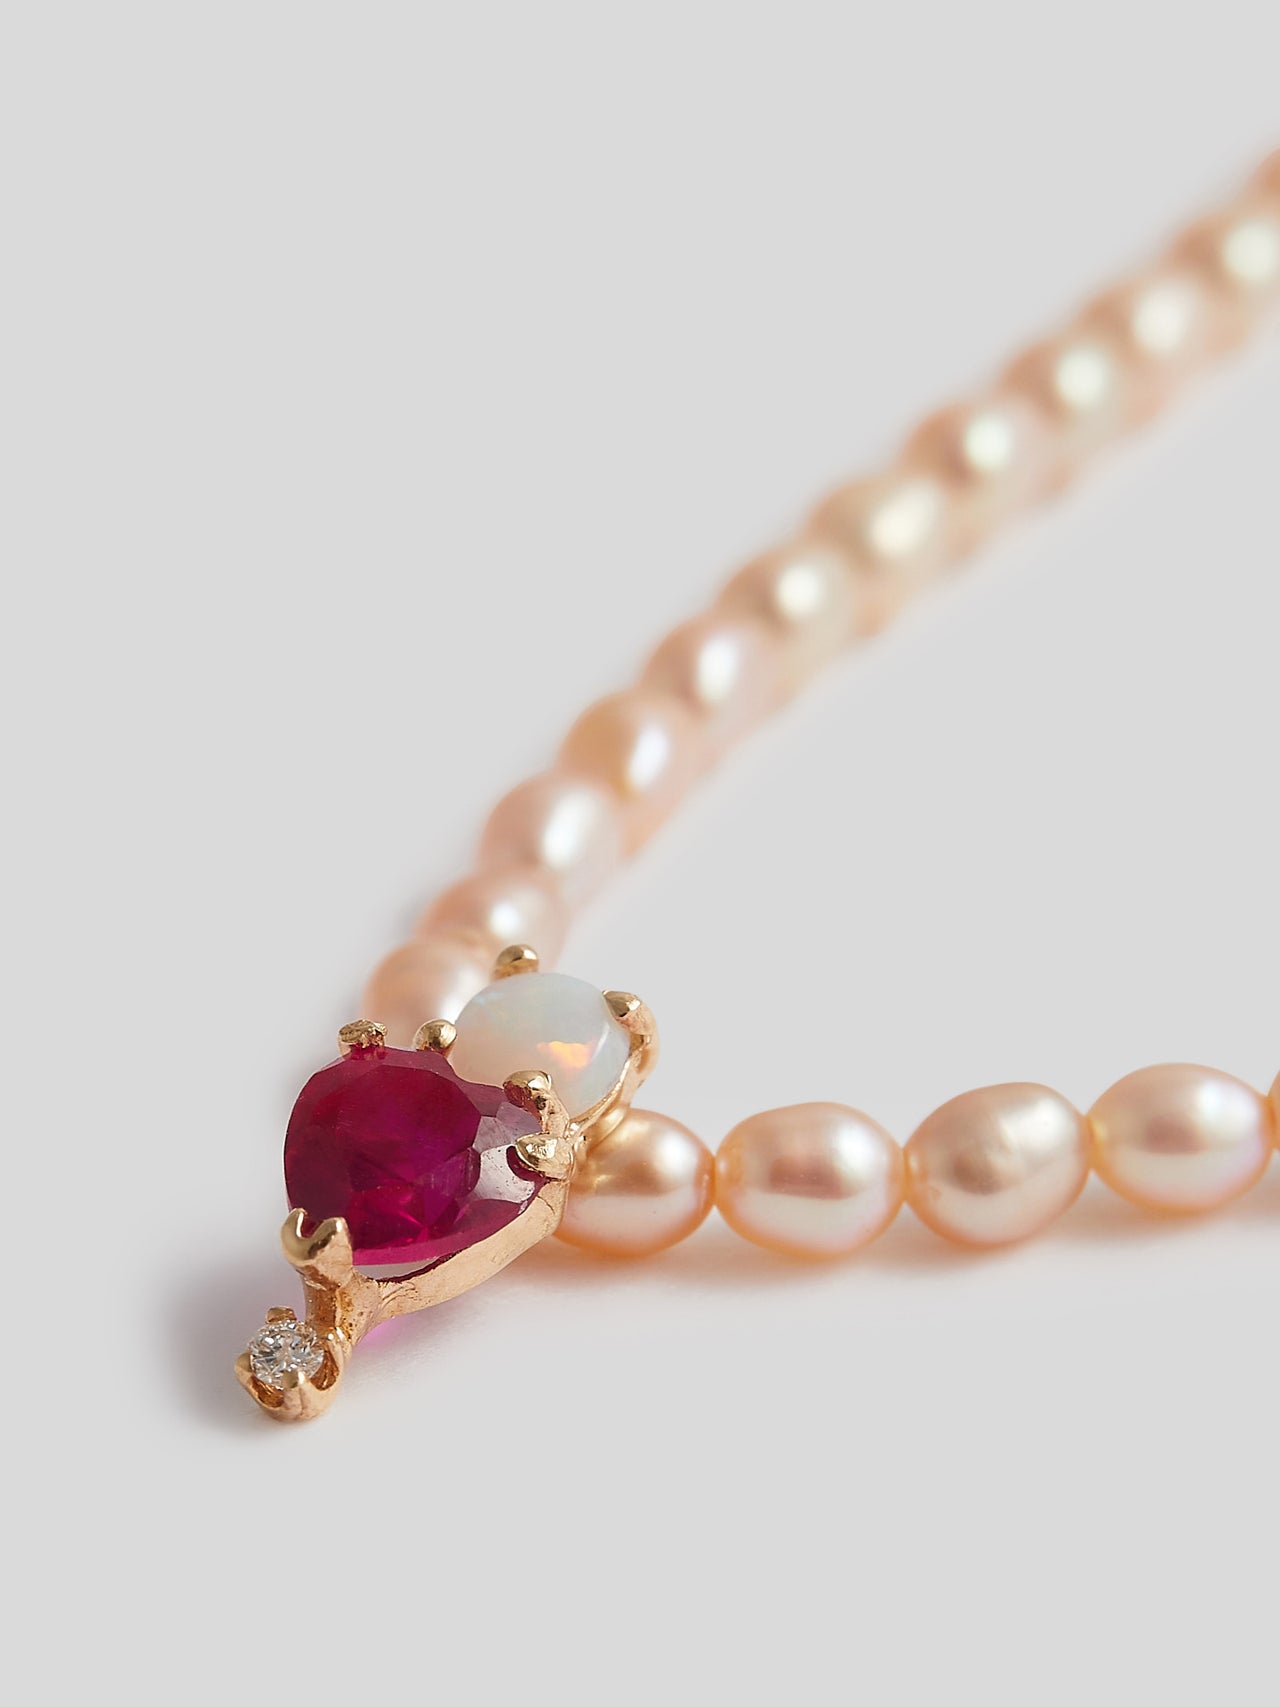 Close up product shot of a pink freshwater pearl necklace with a pendant that is a red heart gem with a small round opal gem stacked on top and diamond at bottom of pendant. Background is white. 